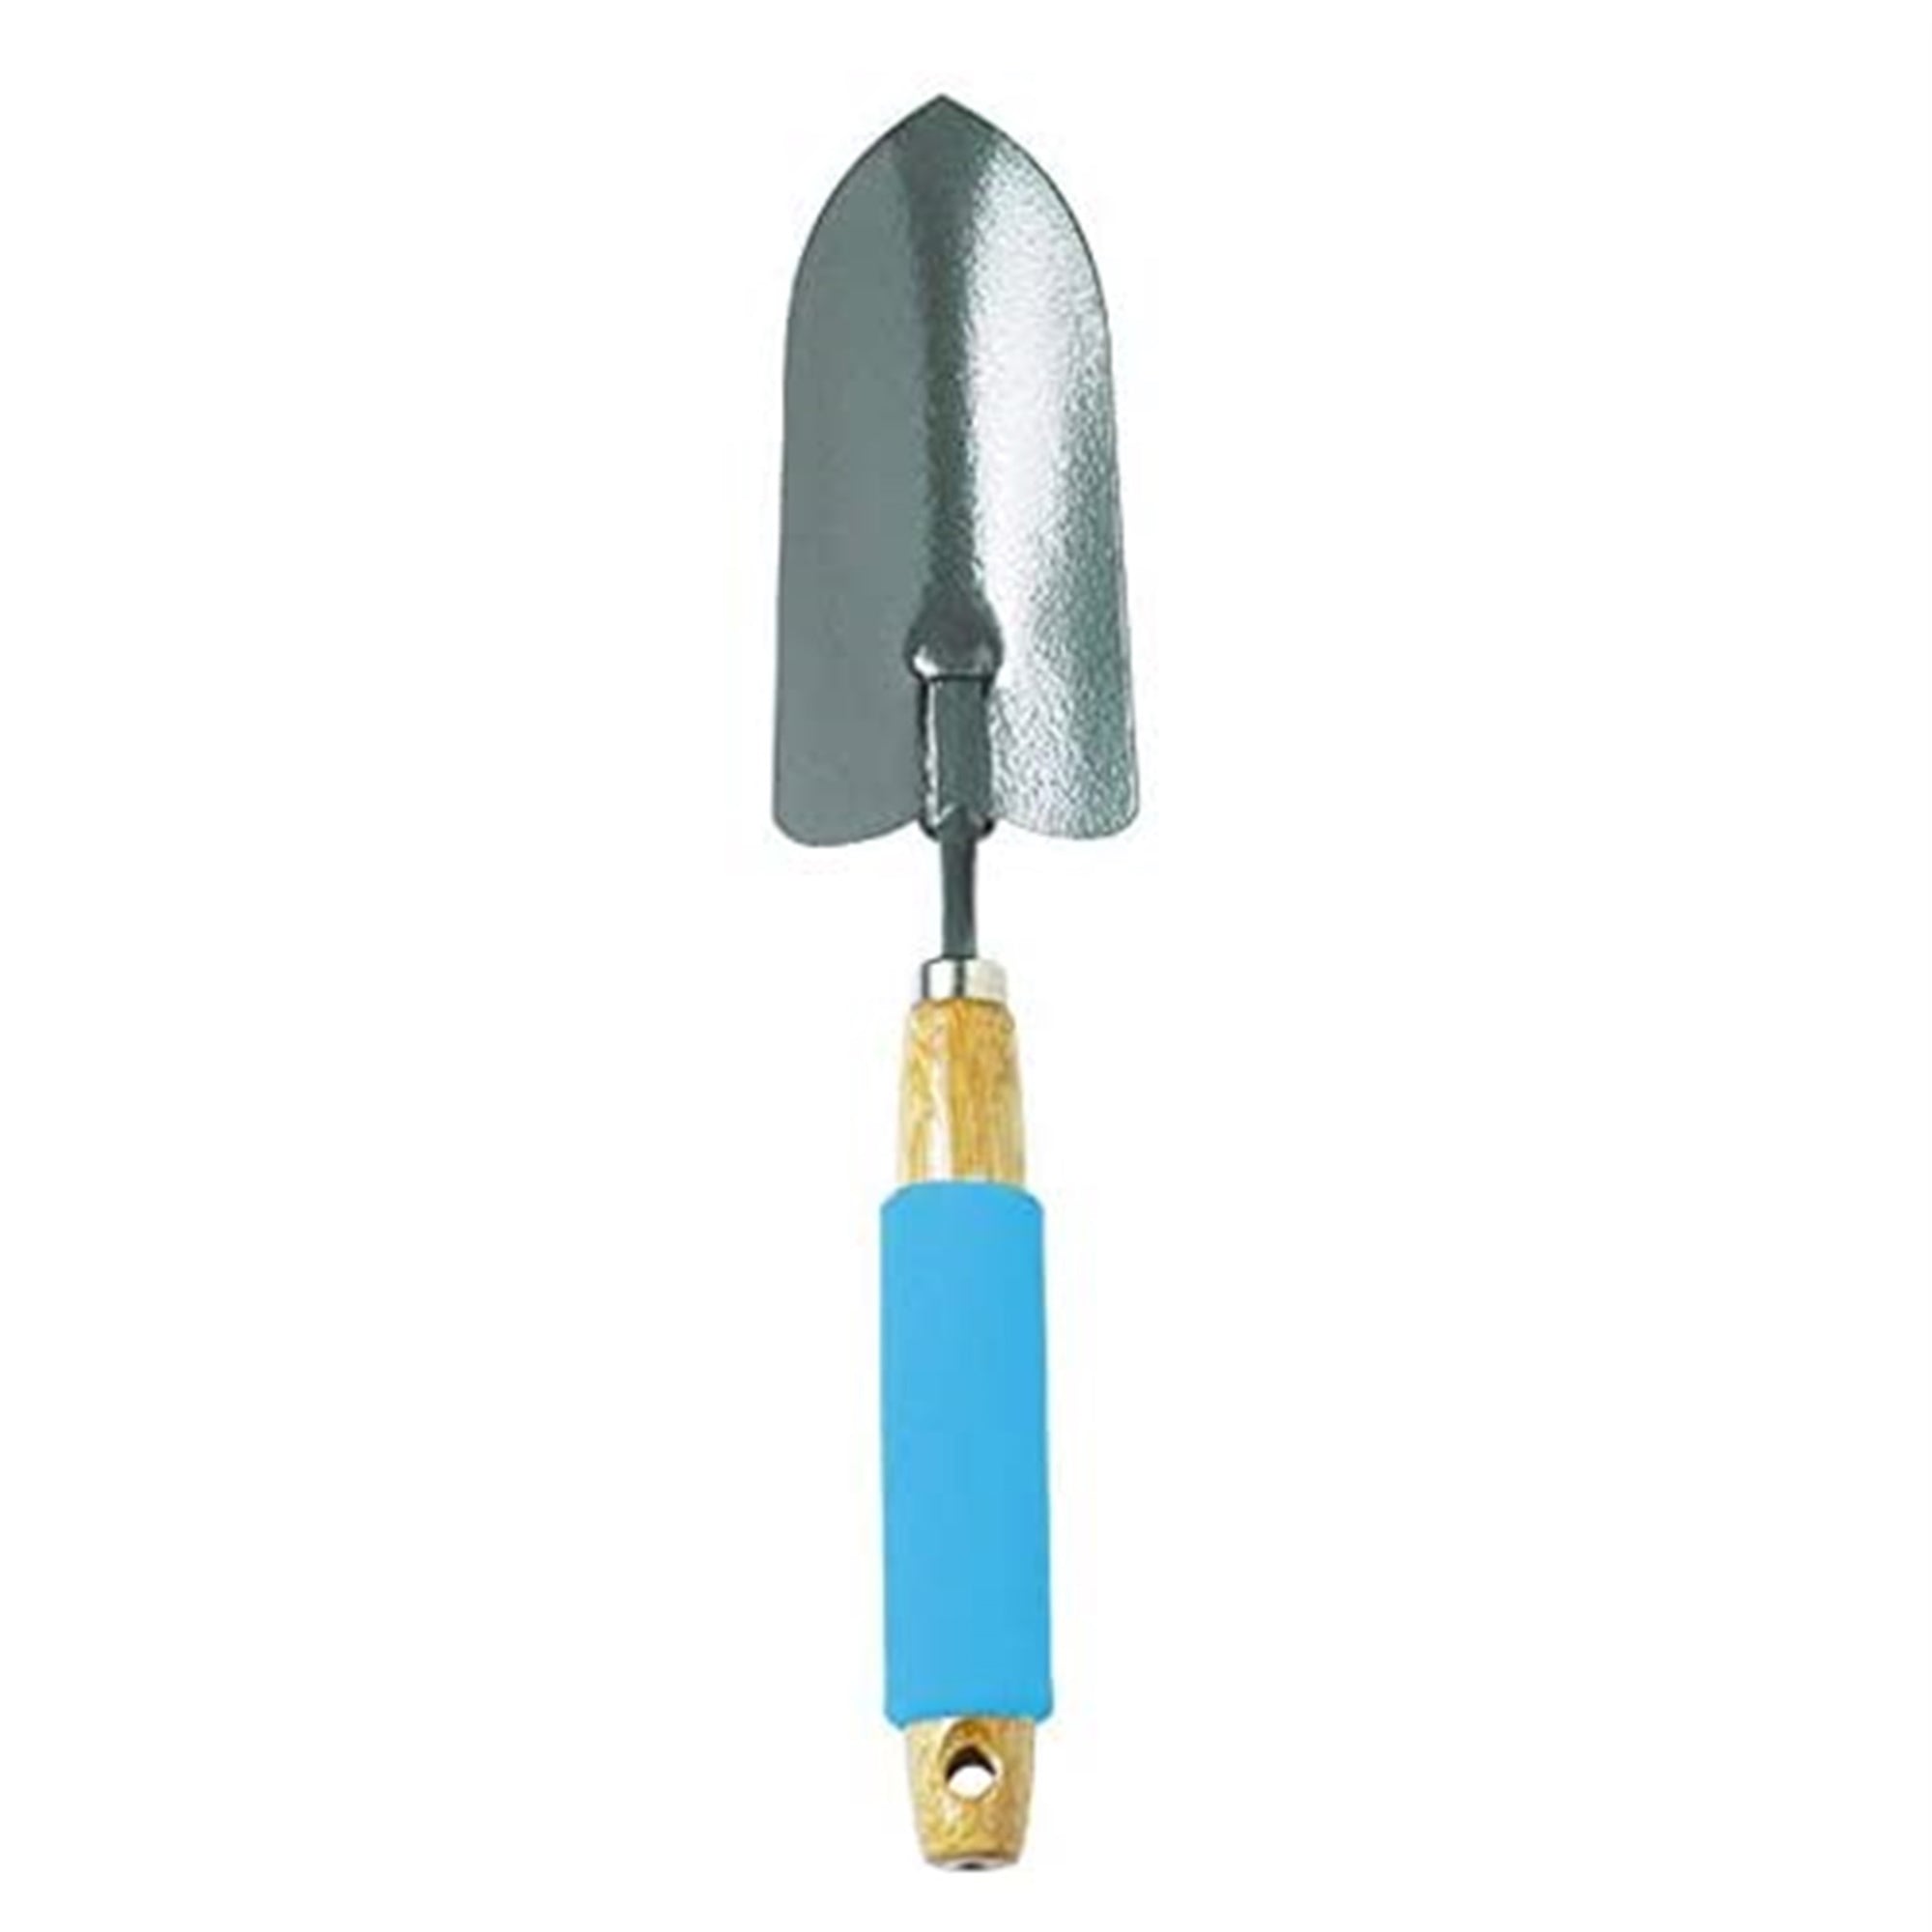 Bloom Garden Cushion Grip Trowel, Assorted Colors, (Pack of ONE)